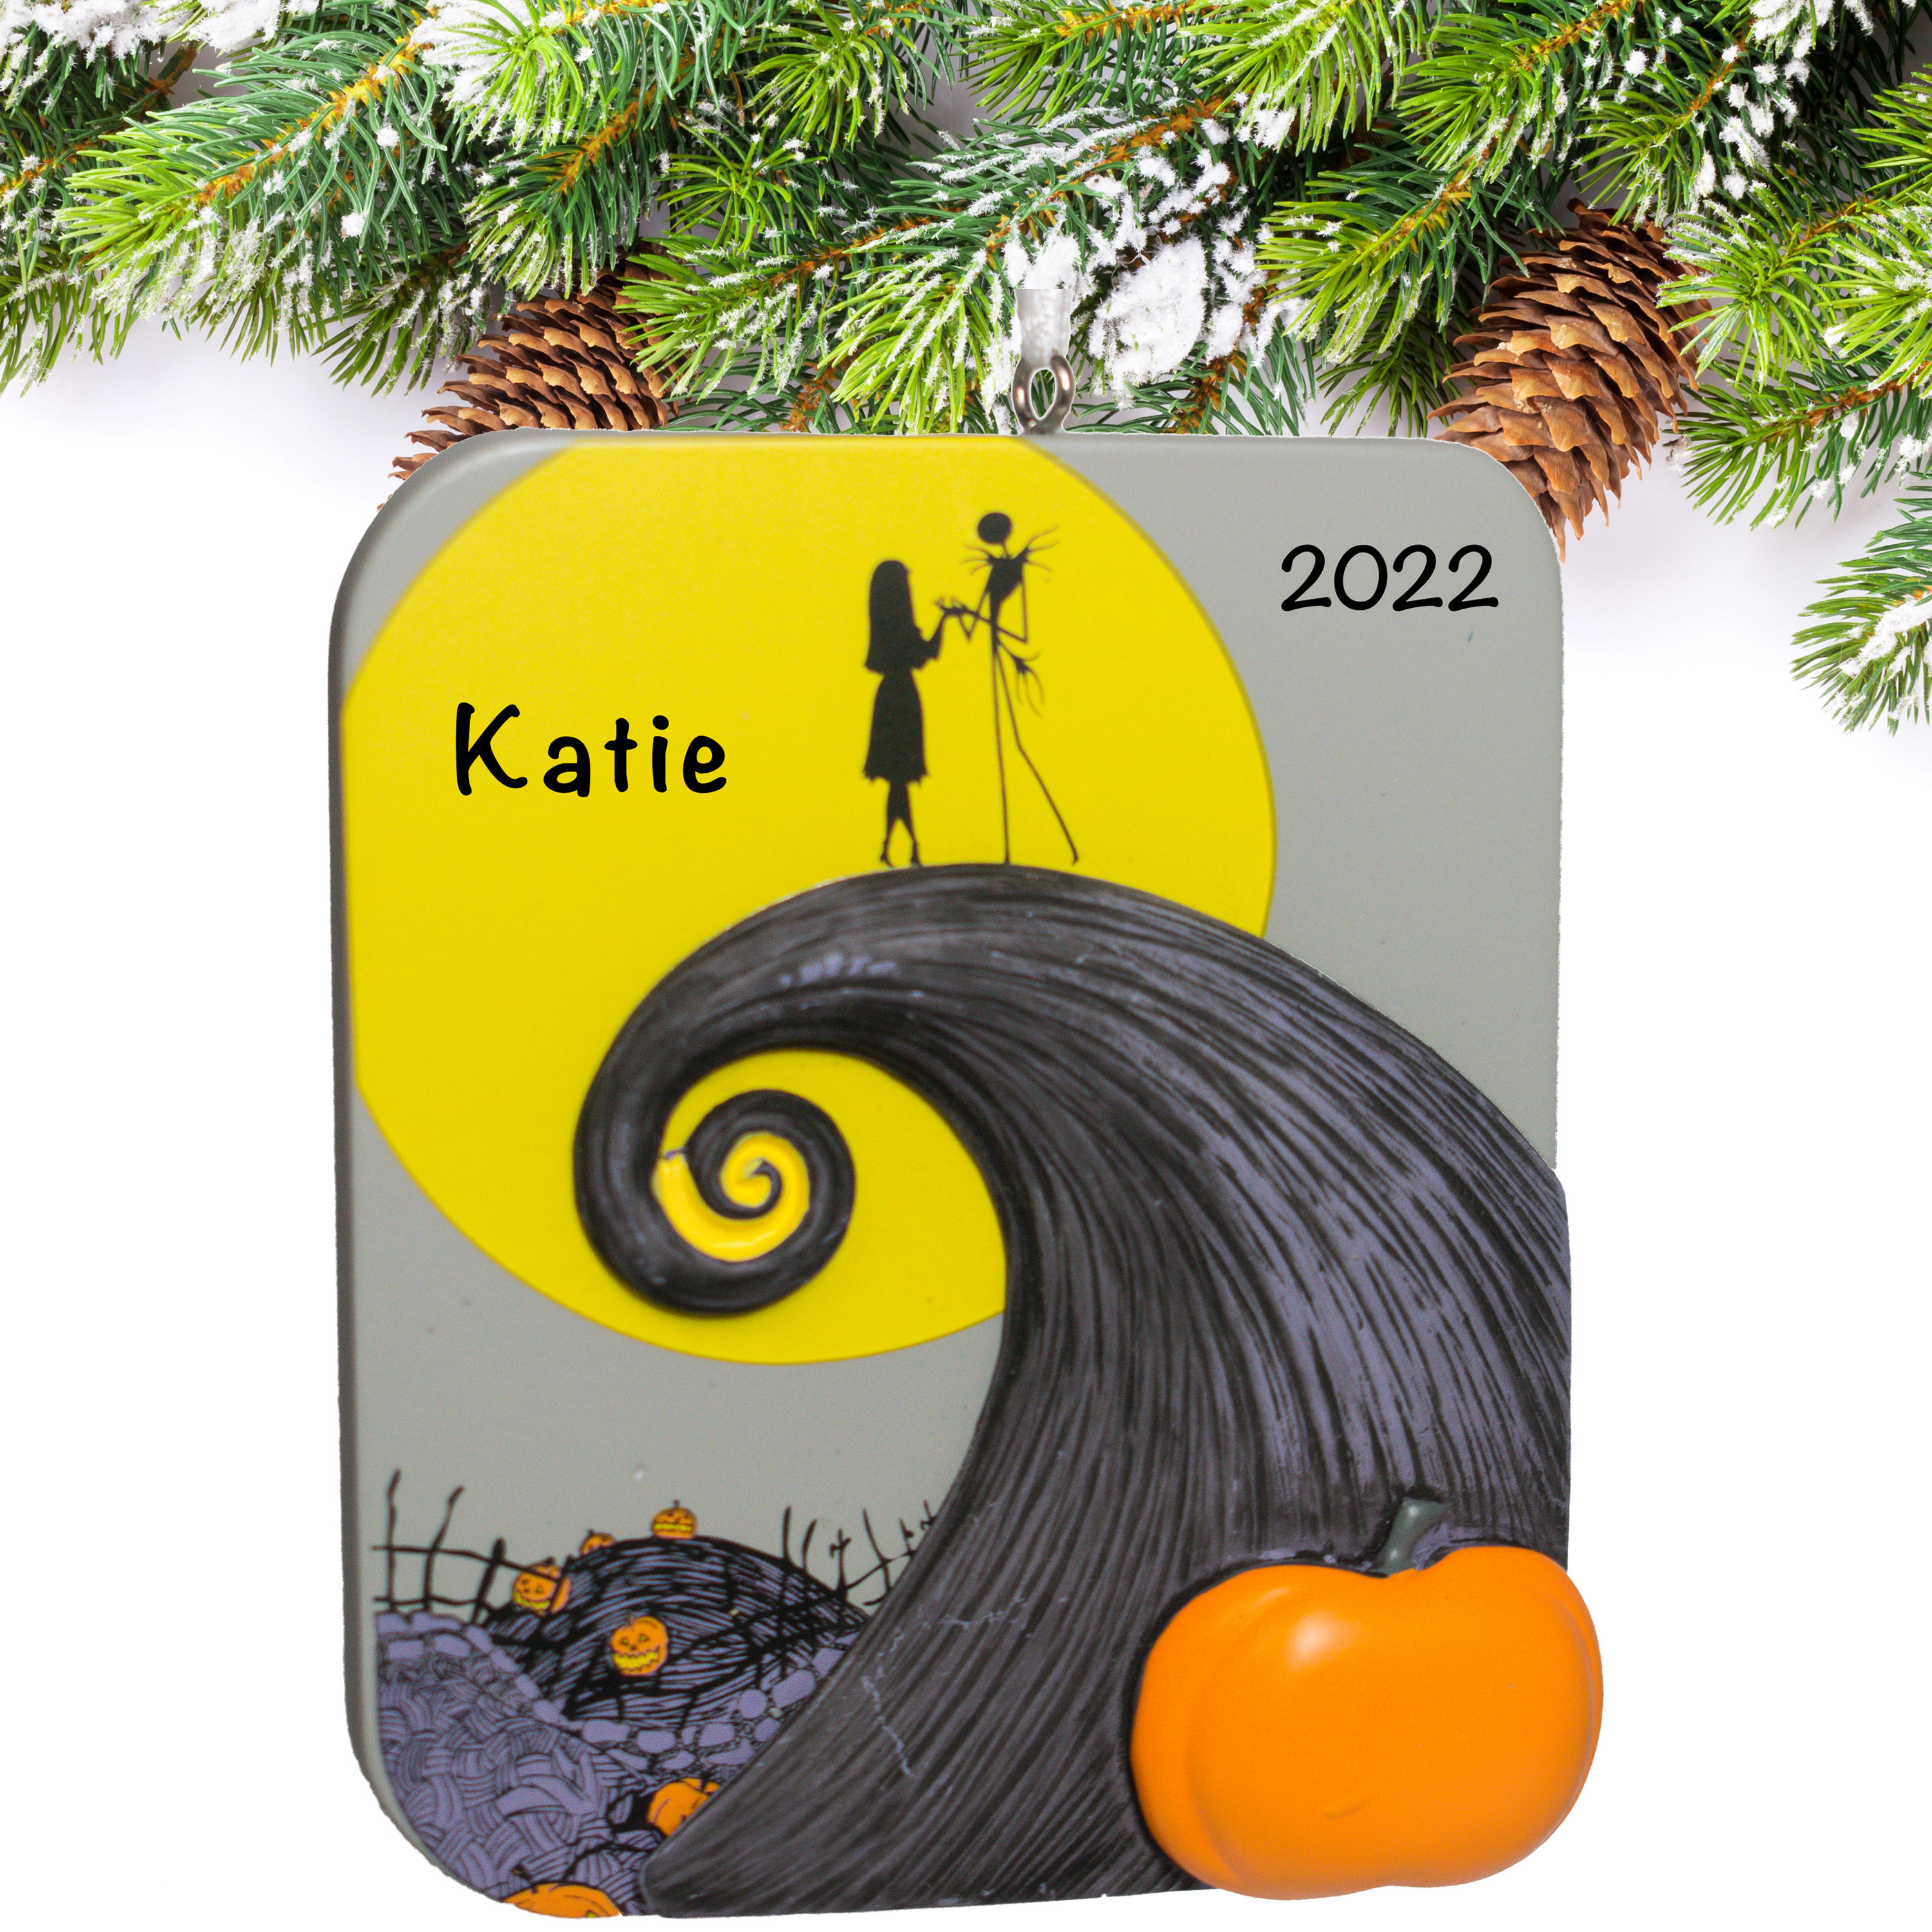 Personalized Nightmare Before Christmas Ornament